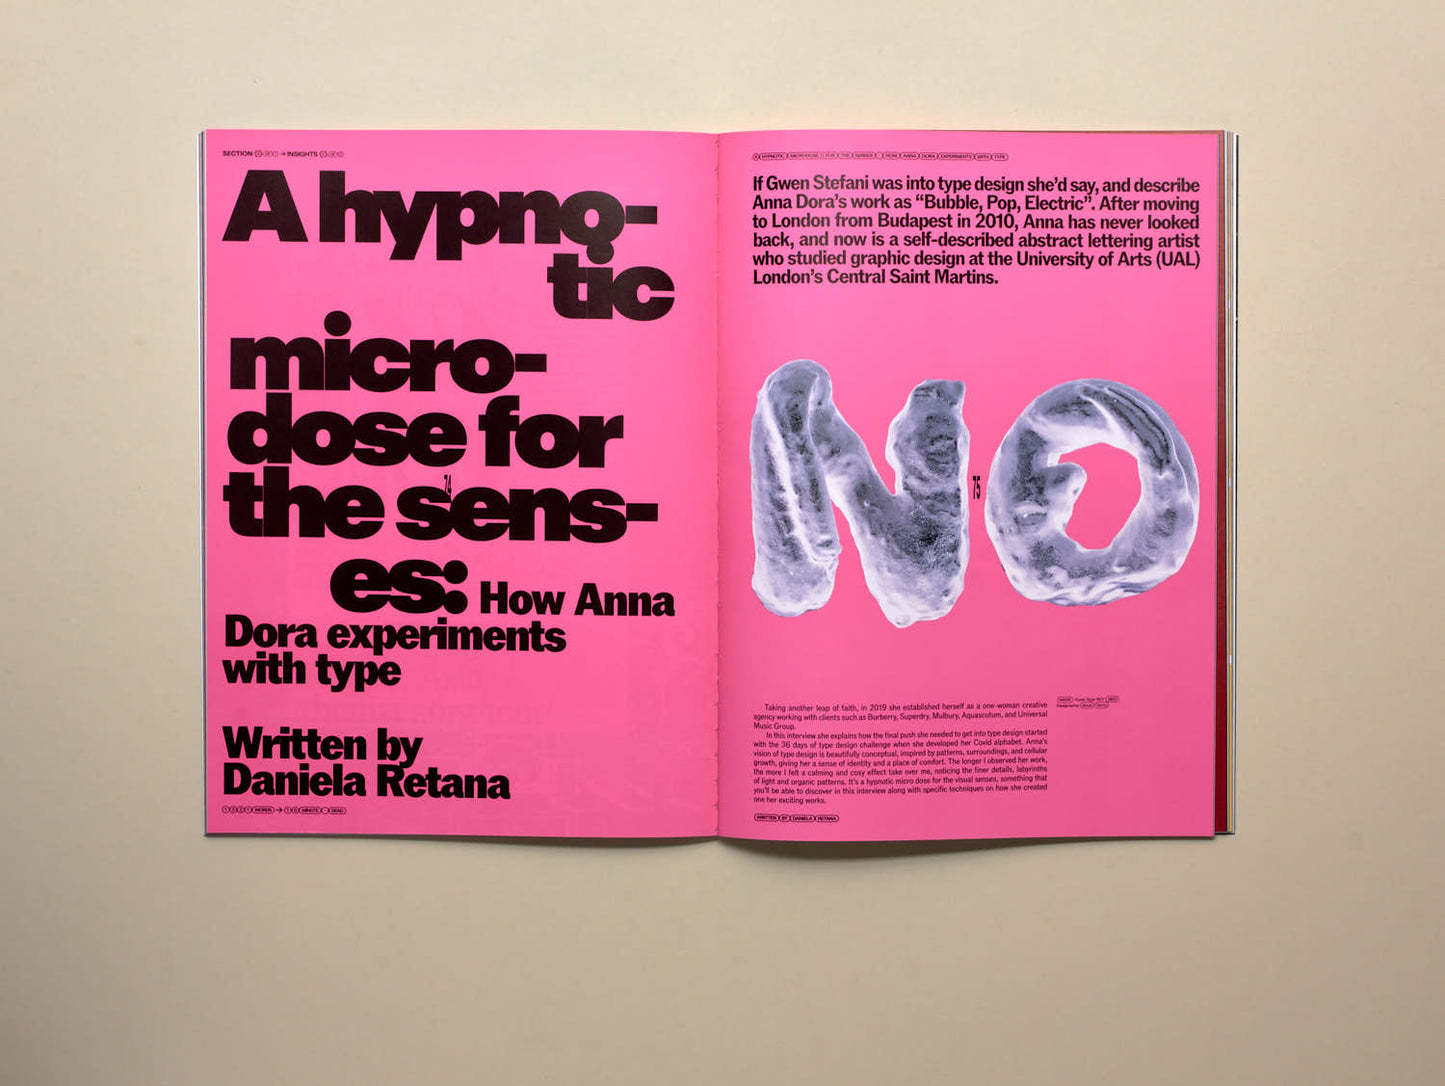 Typeone, #6 – The Experimental Type Issue